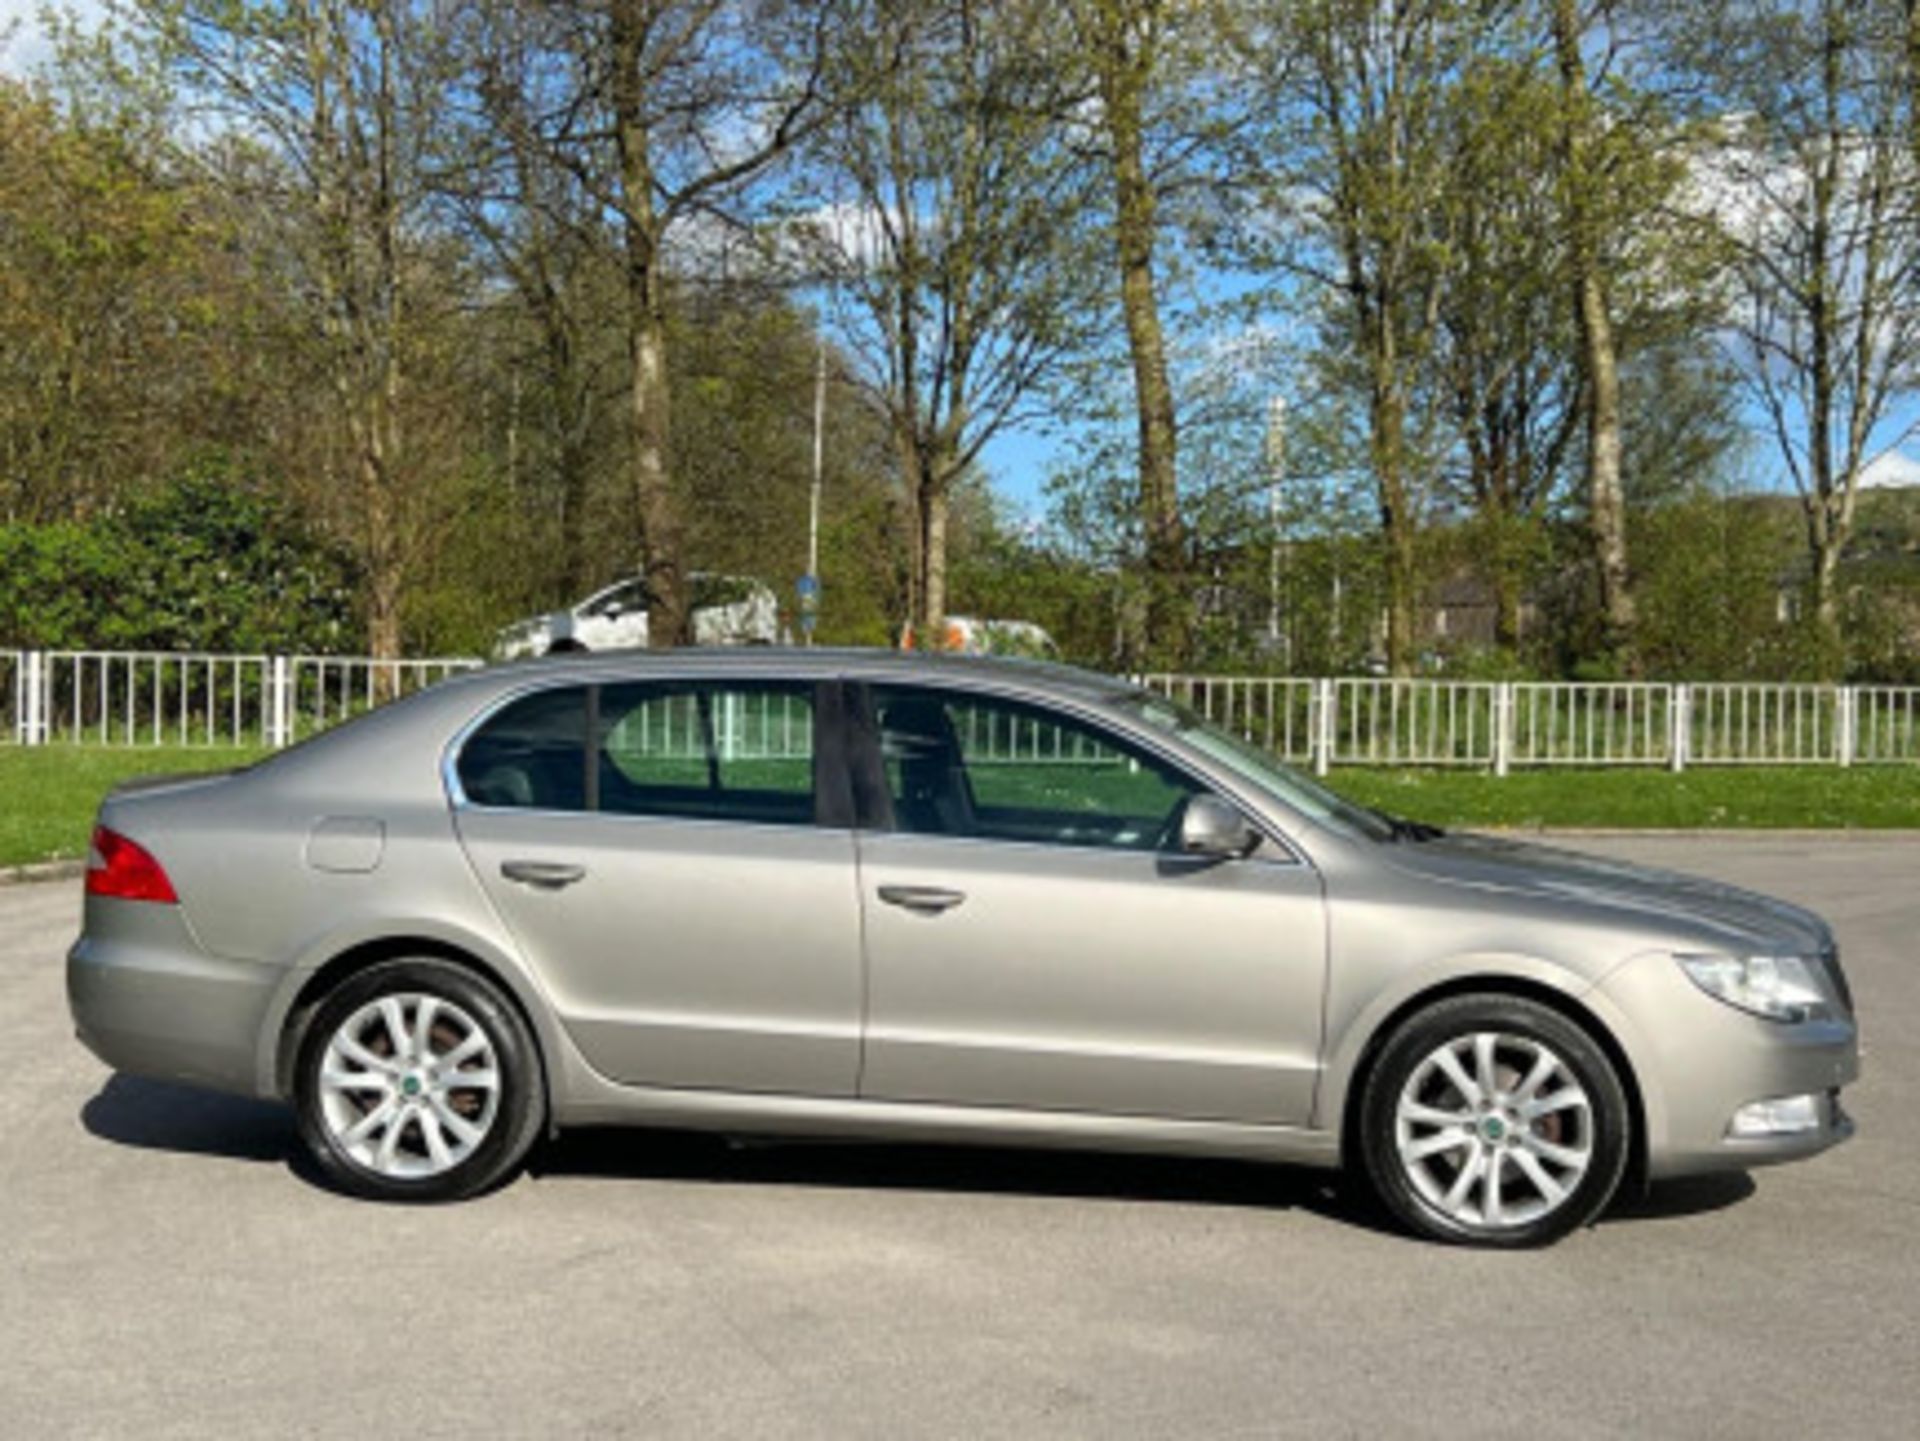 >>--NO VAT ON HAMMER--<<STYLISH AND RELIABLE SKODA SUPERB 1.6 TDI S GREENLINE II EURO 5 - Image 70 of 141